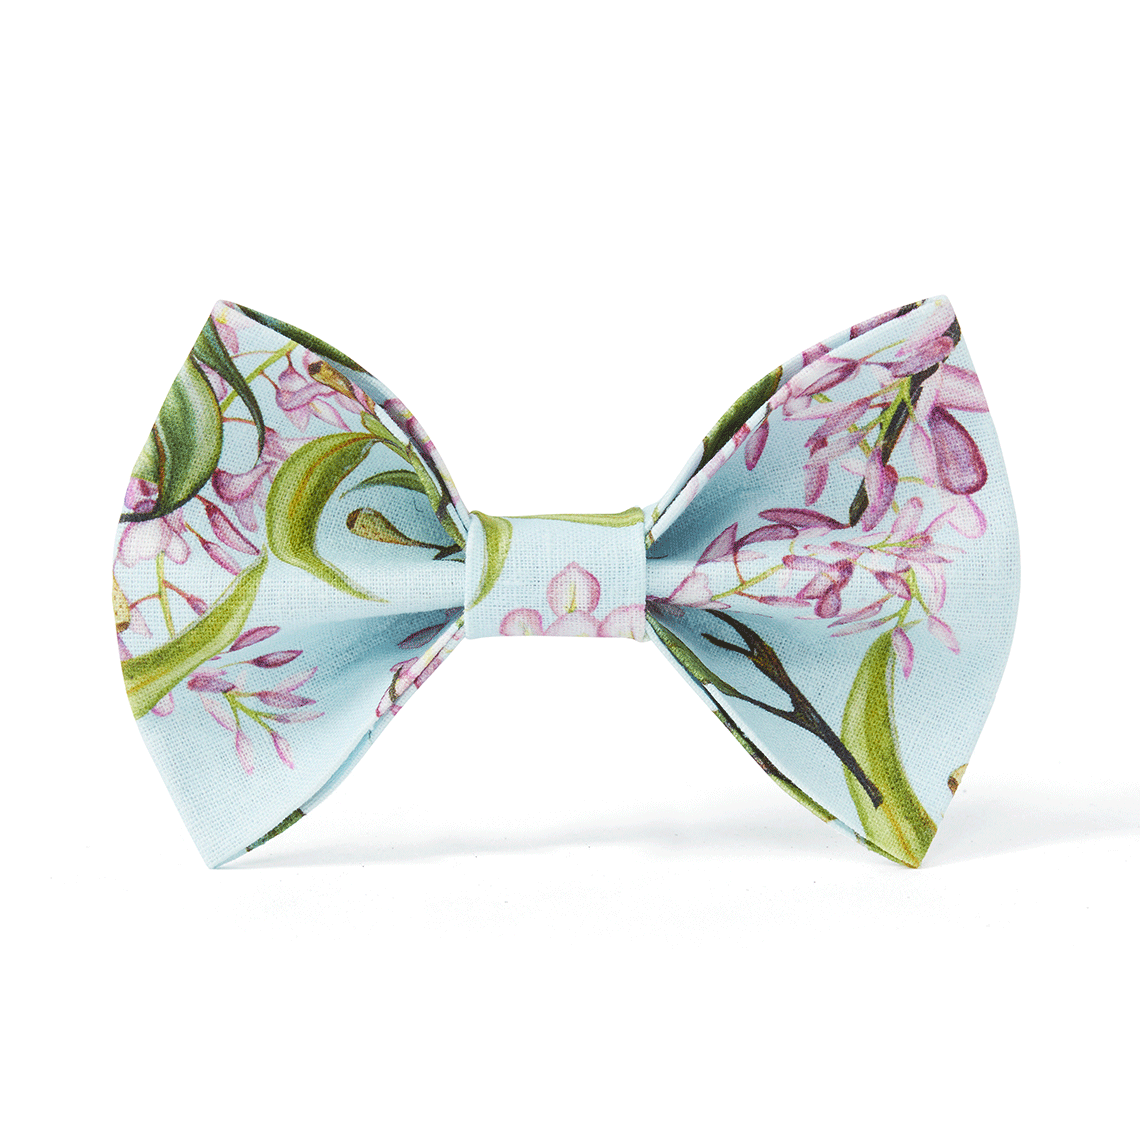 DOG BOW TIE - WATERCOLOUR FLORAL